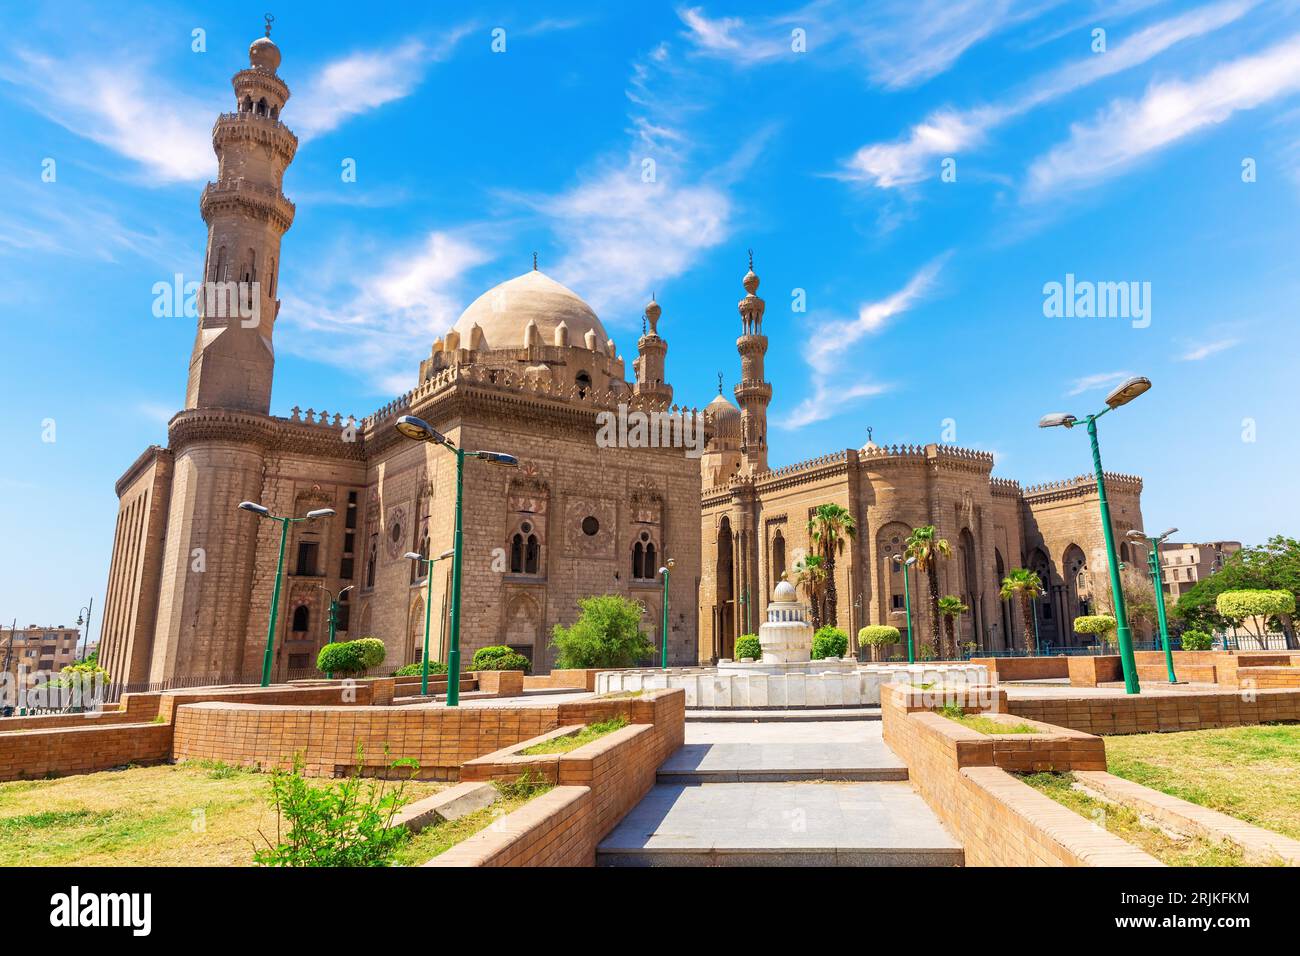 Mosque-Madrasa of Sultan Hasan, one of the largest mosques in the world, important Muslim landmark, Cairo, Egypt. Stock Photo